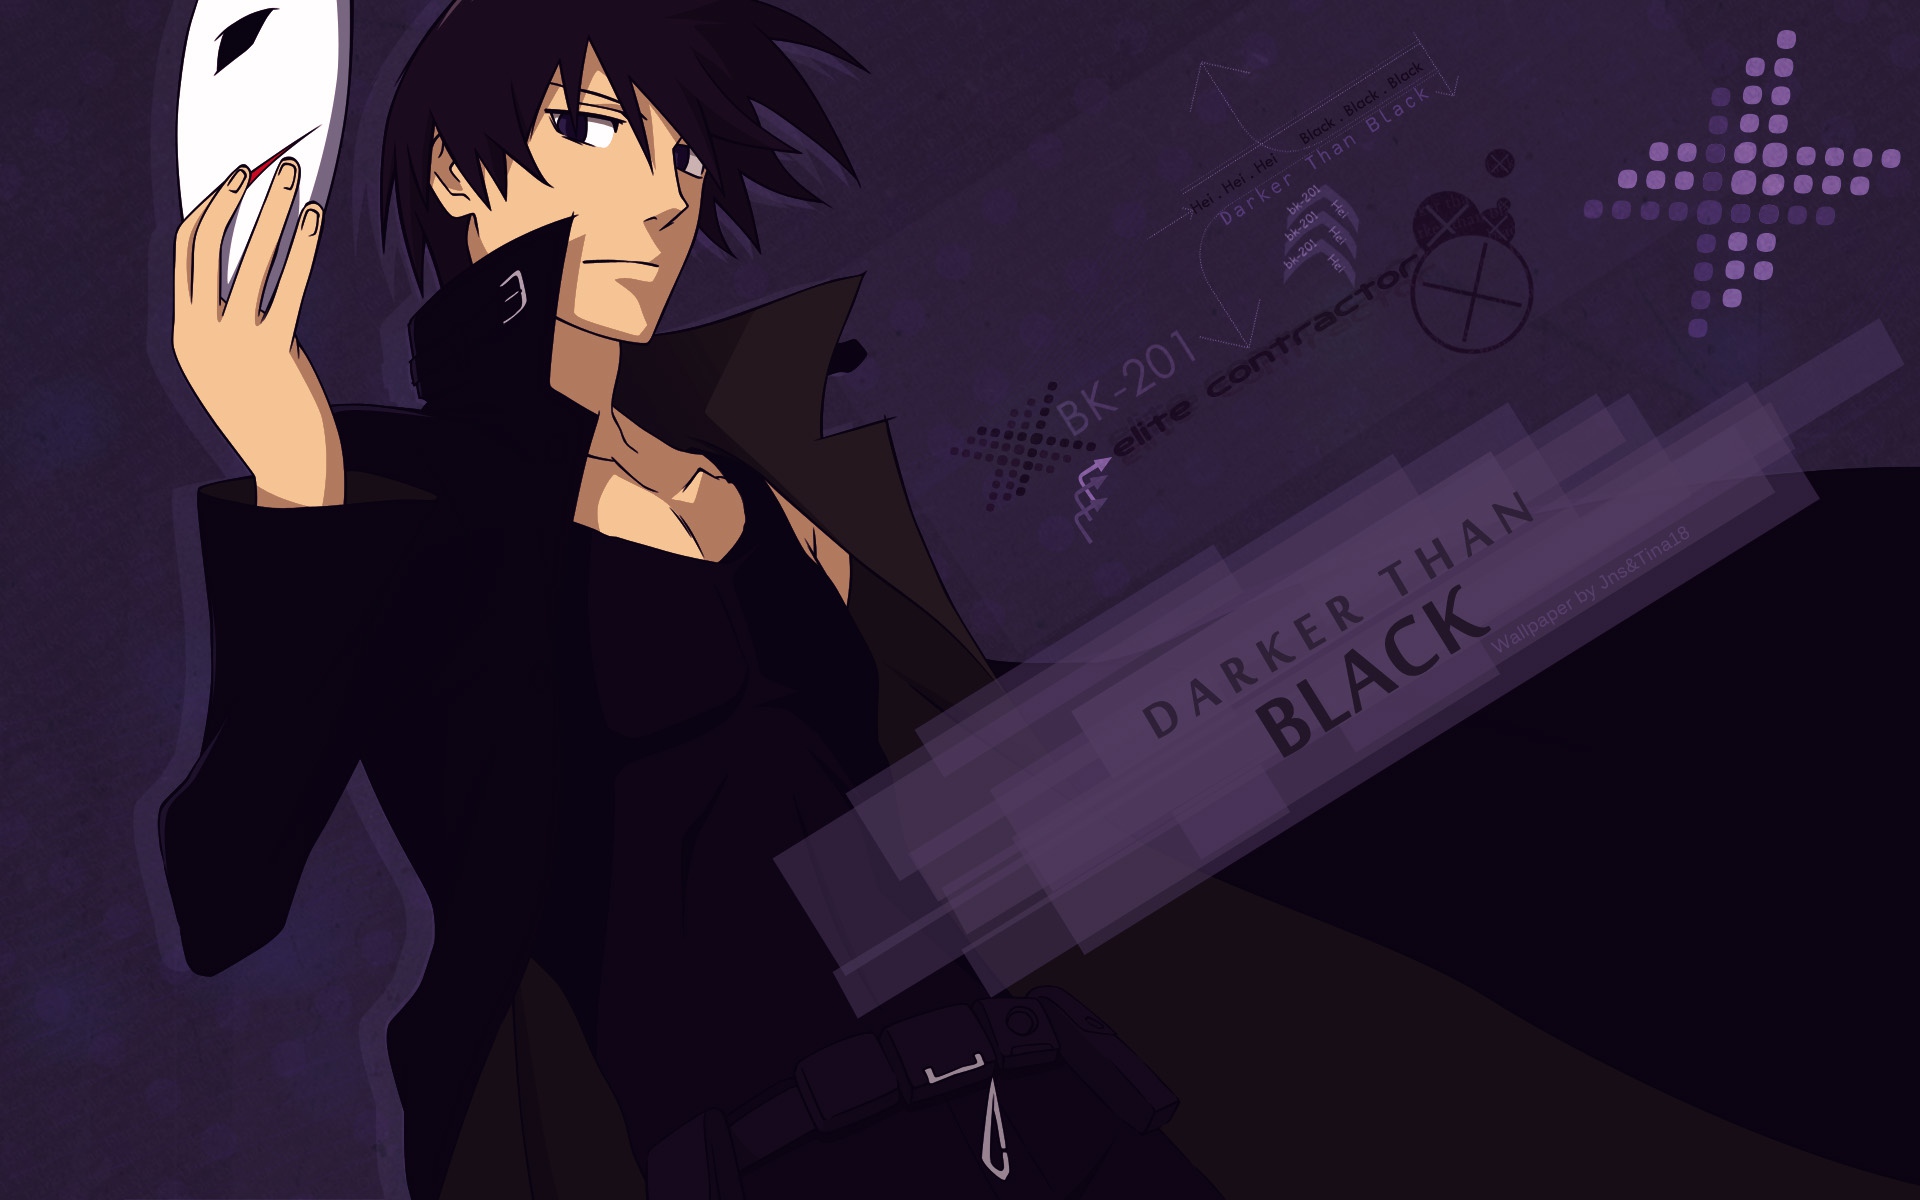 Anime character Hei from darker than black with a cool background.